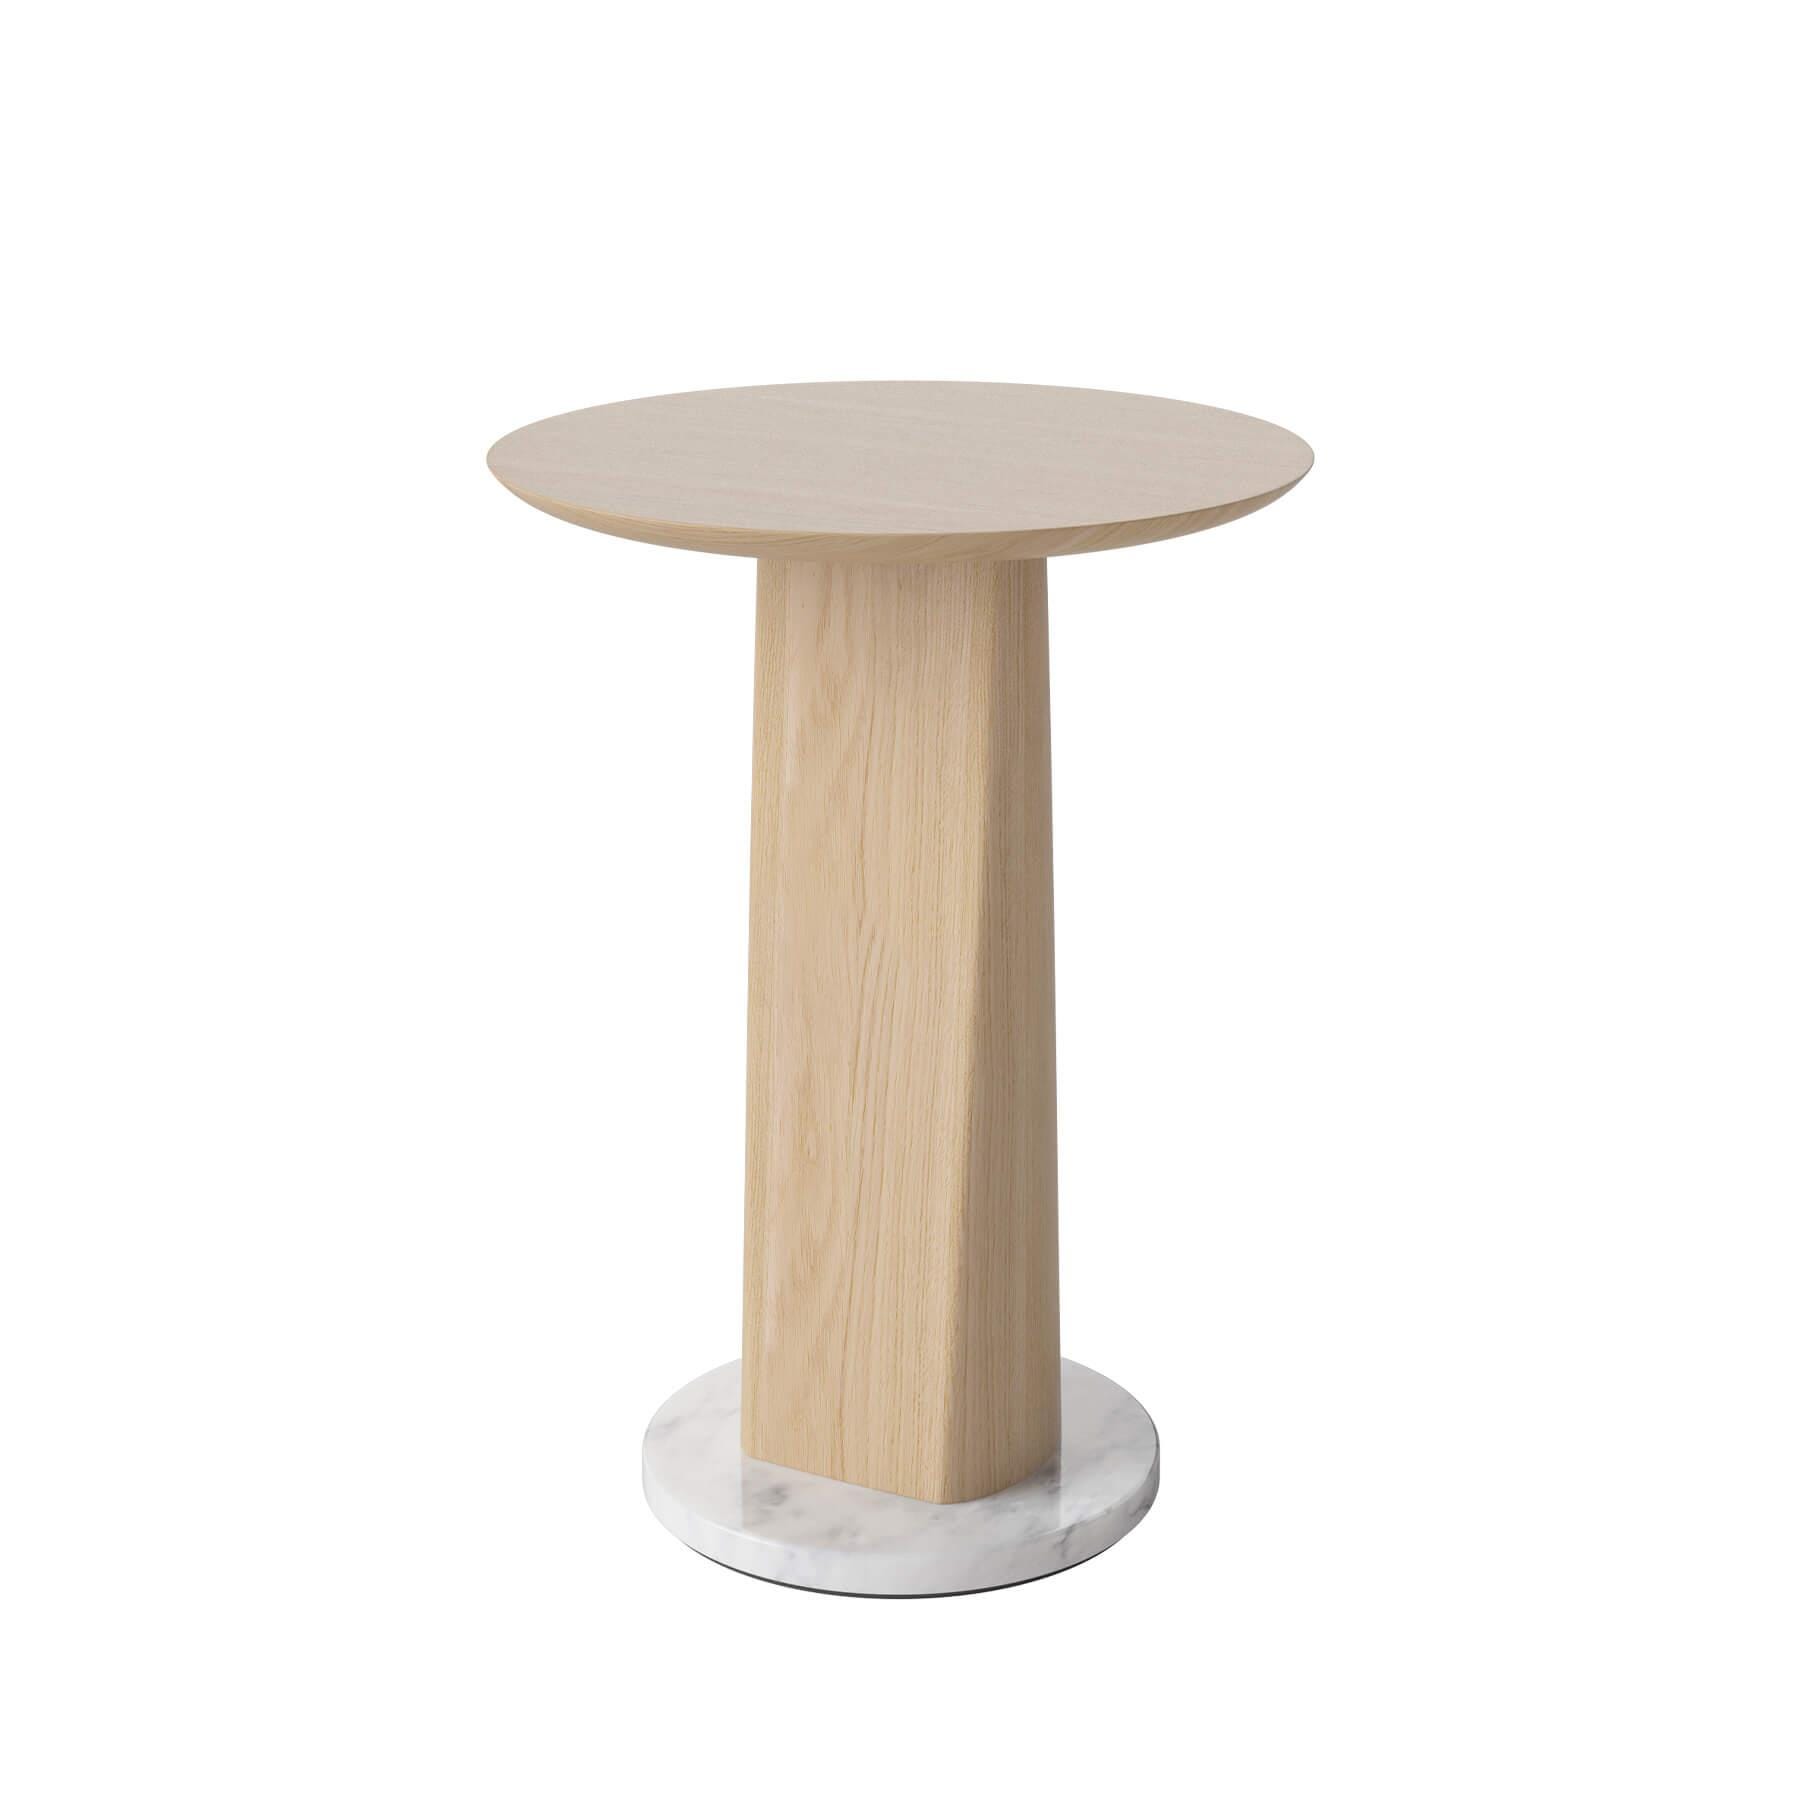 Bolia Root Side Table Small High White Oiled Oak Light Wood Designer Furniture From Holloways Of Ludlow